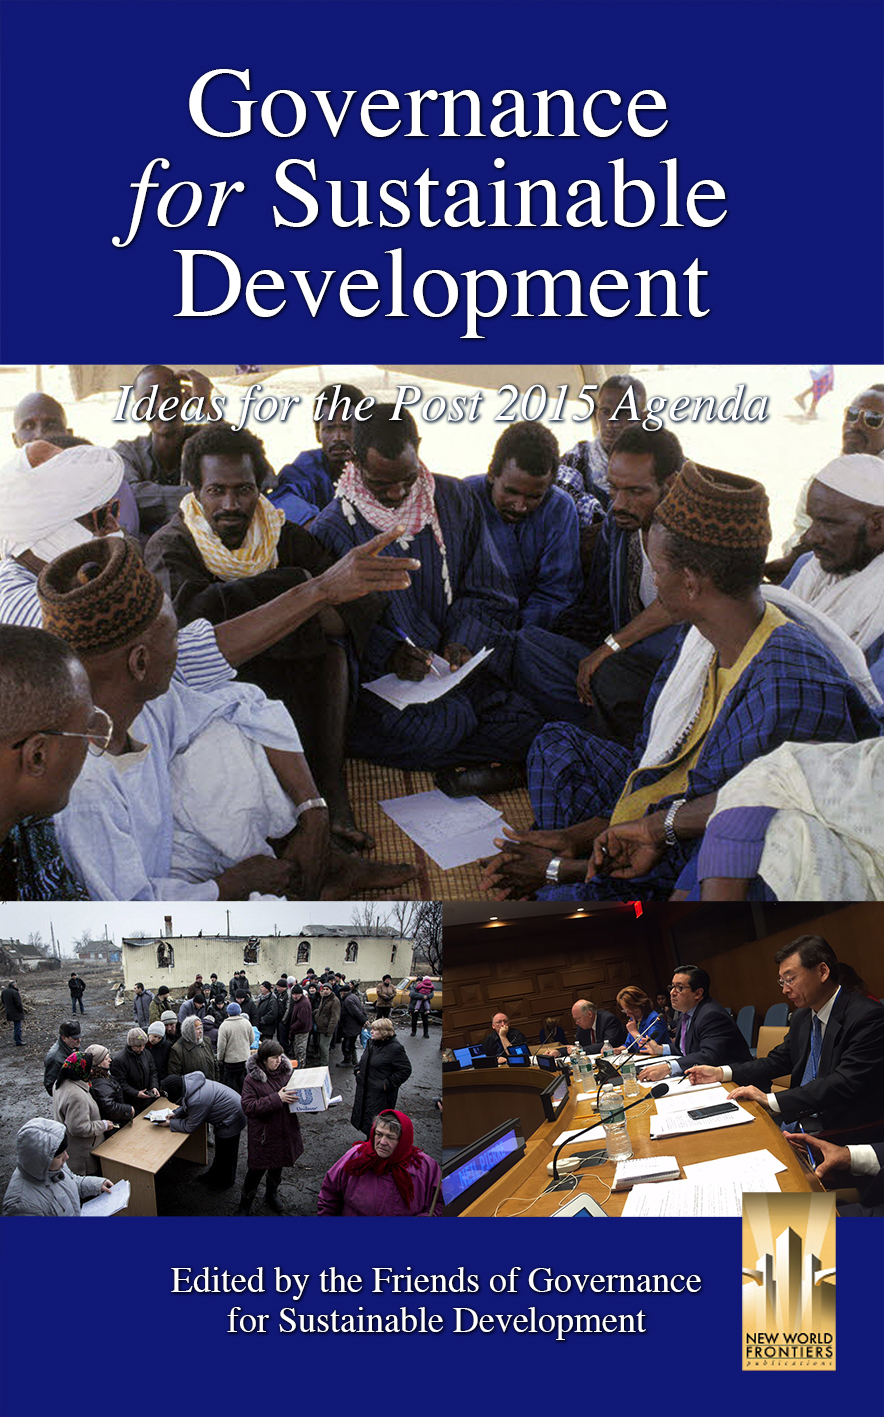 New Book: Governance for Sustainable Development